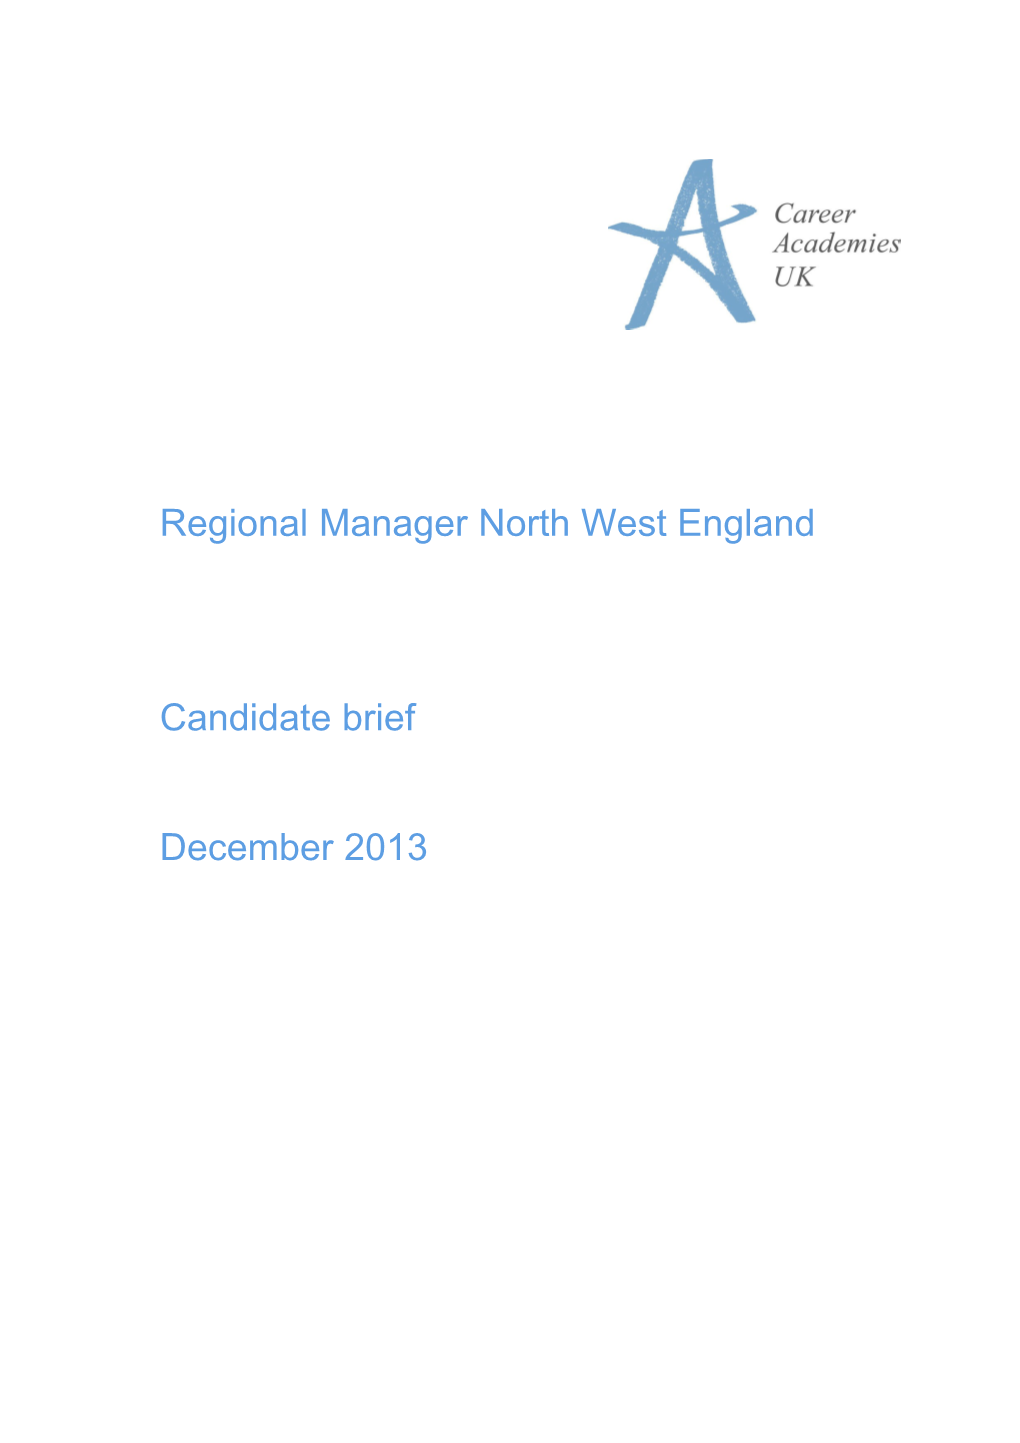 Regional Manager North West England